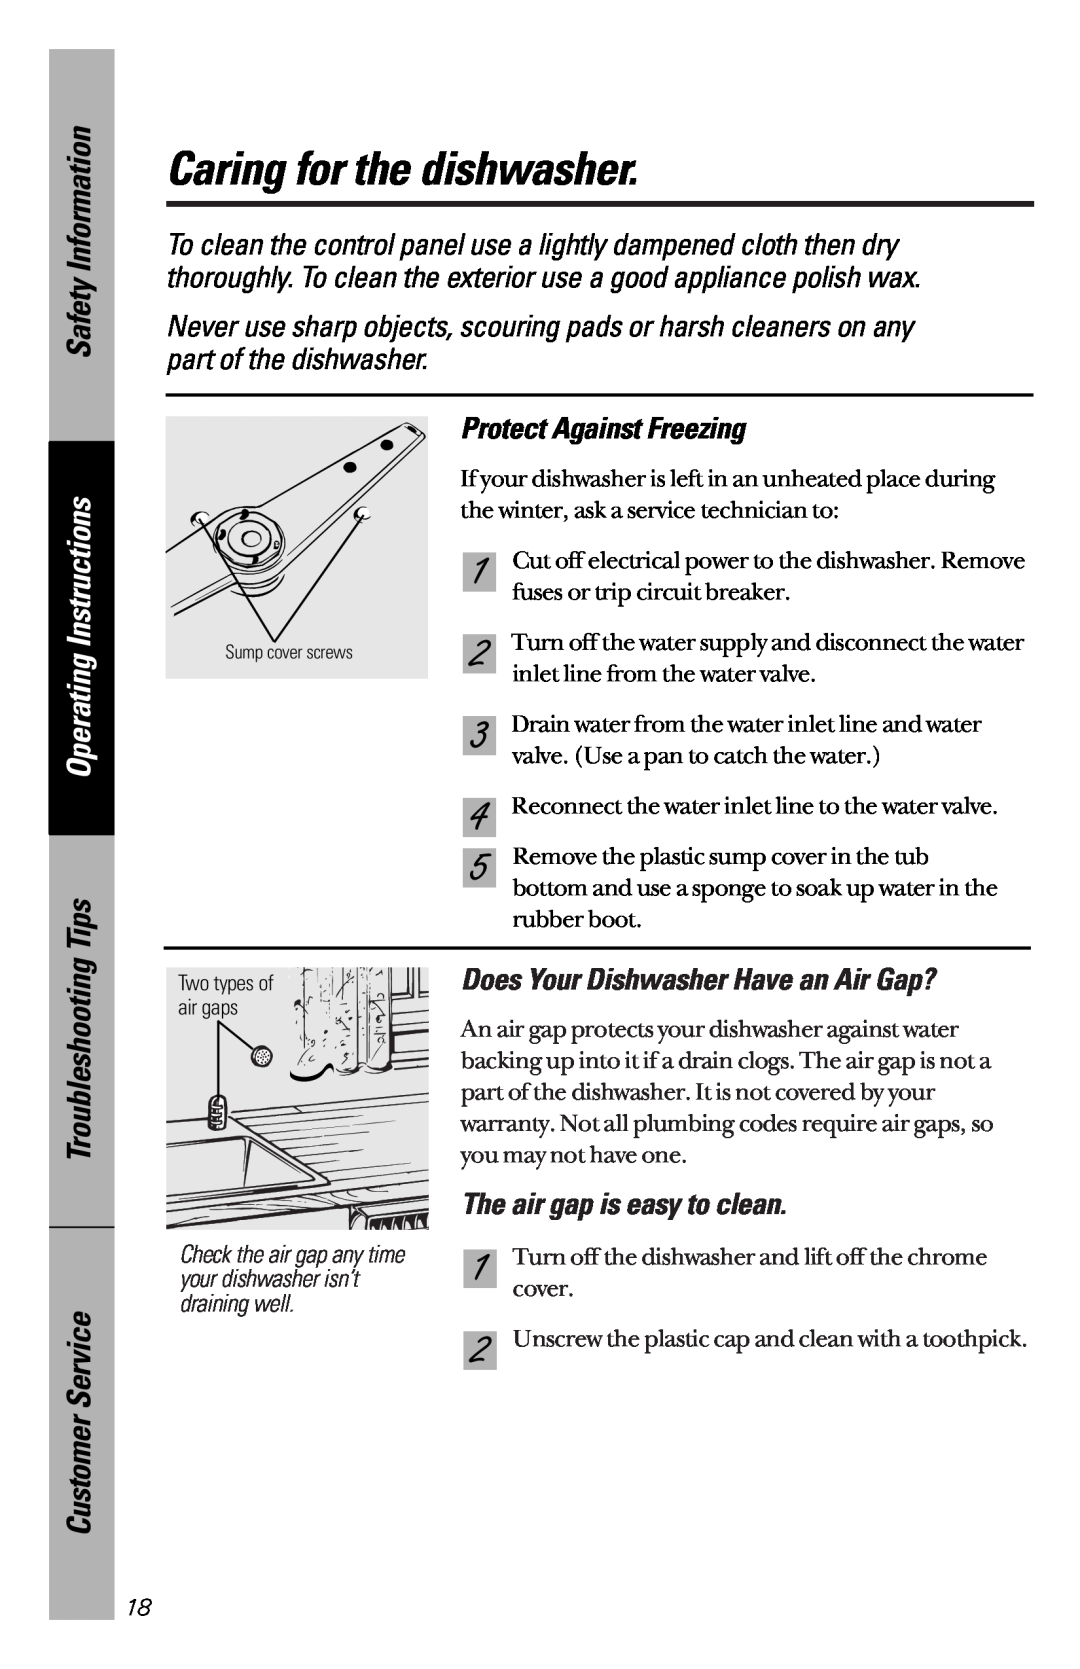 GE GSD4132, GSD4134 Caring for the dishwasher, Tips, Protect Against Freezing, Does Your Dishwasher Have an Air Gap? 